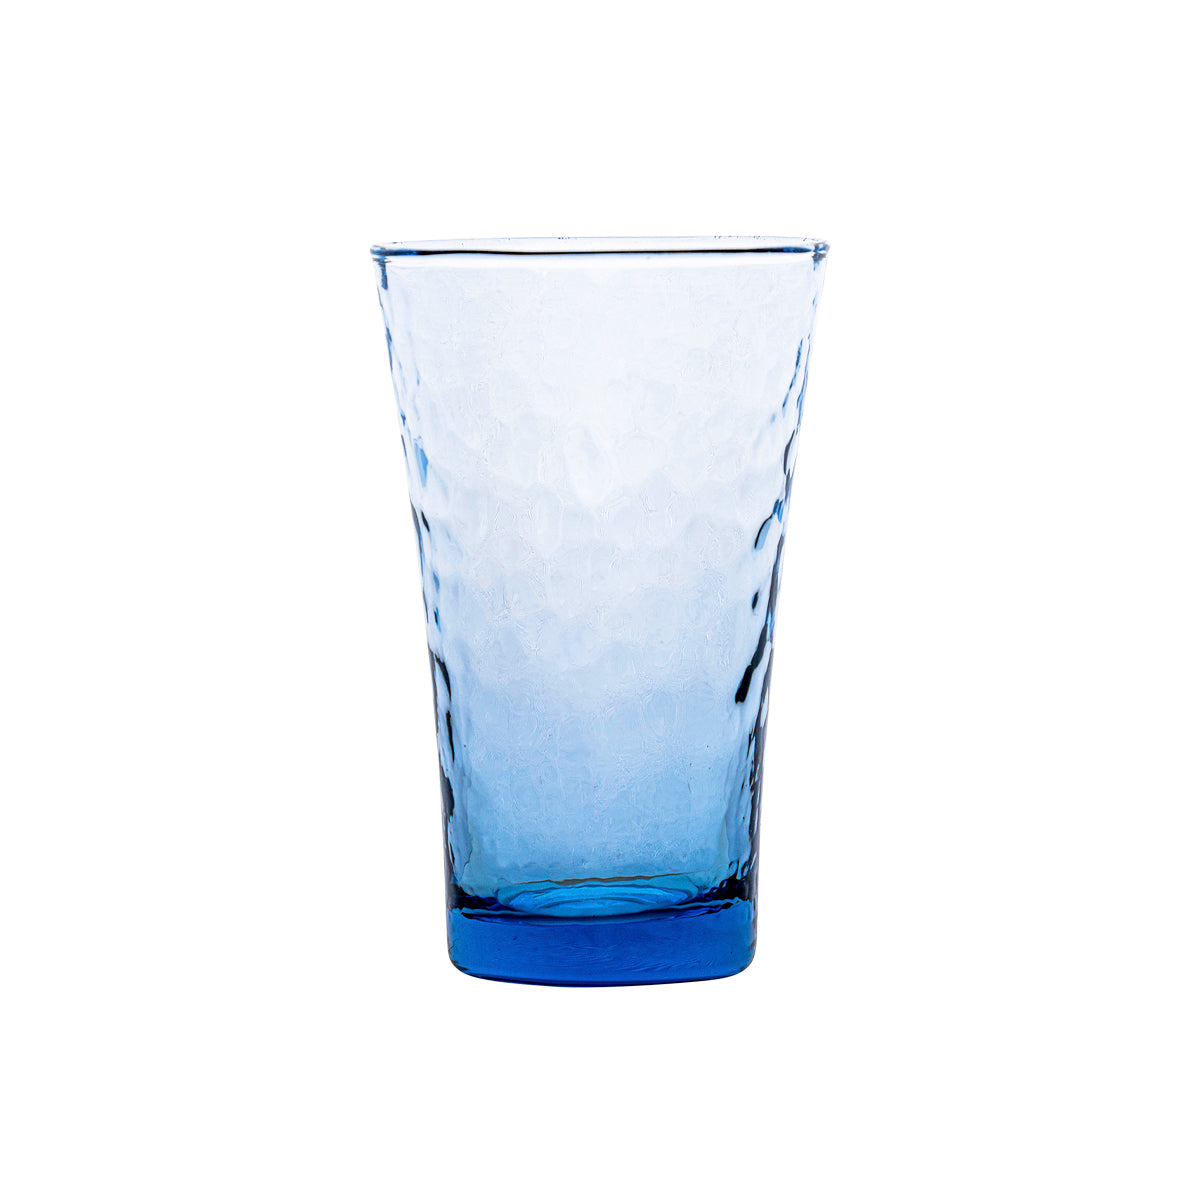 This fetching blue large tumbler is ideal for summer lemonades, homemade sodas or twilight spritzers, 